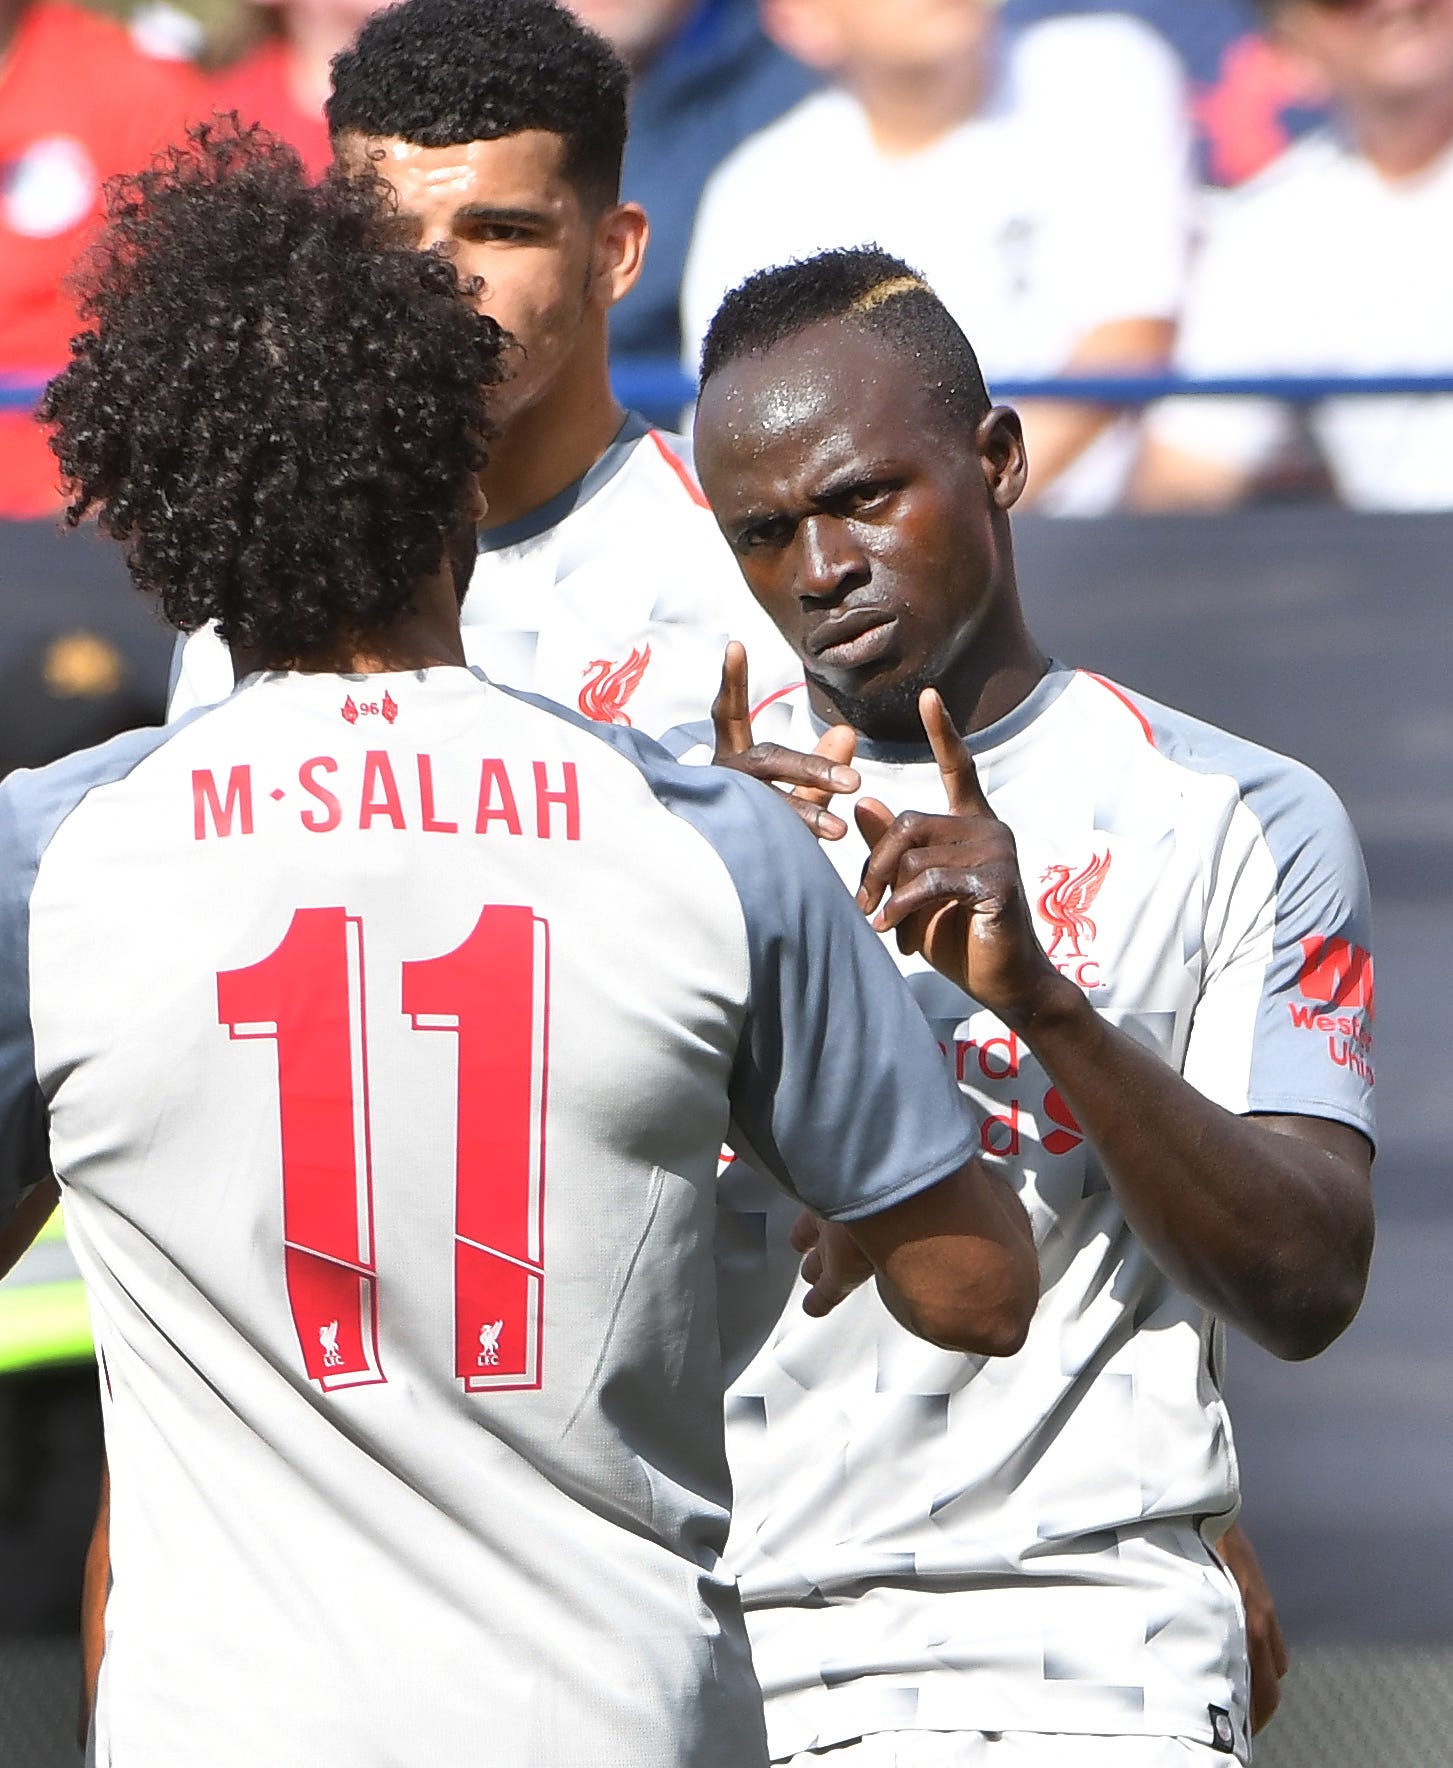 Liverpool's Sadio Mane points out teammate Mohamed Salah after putting in a penalty shot after Salah was kicked in the face by Manchester in the first half.